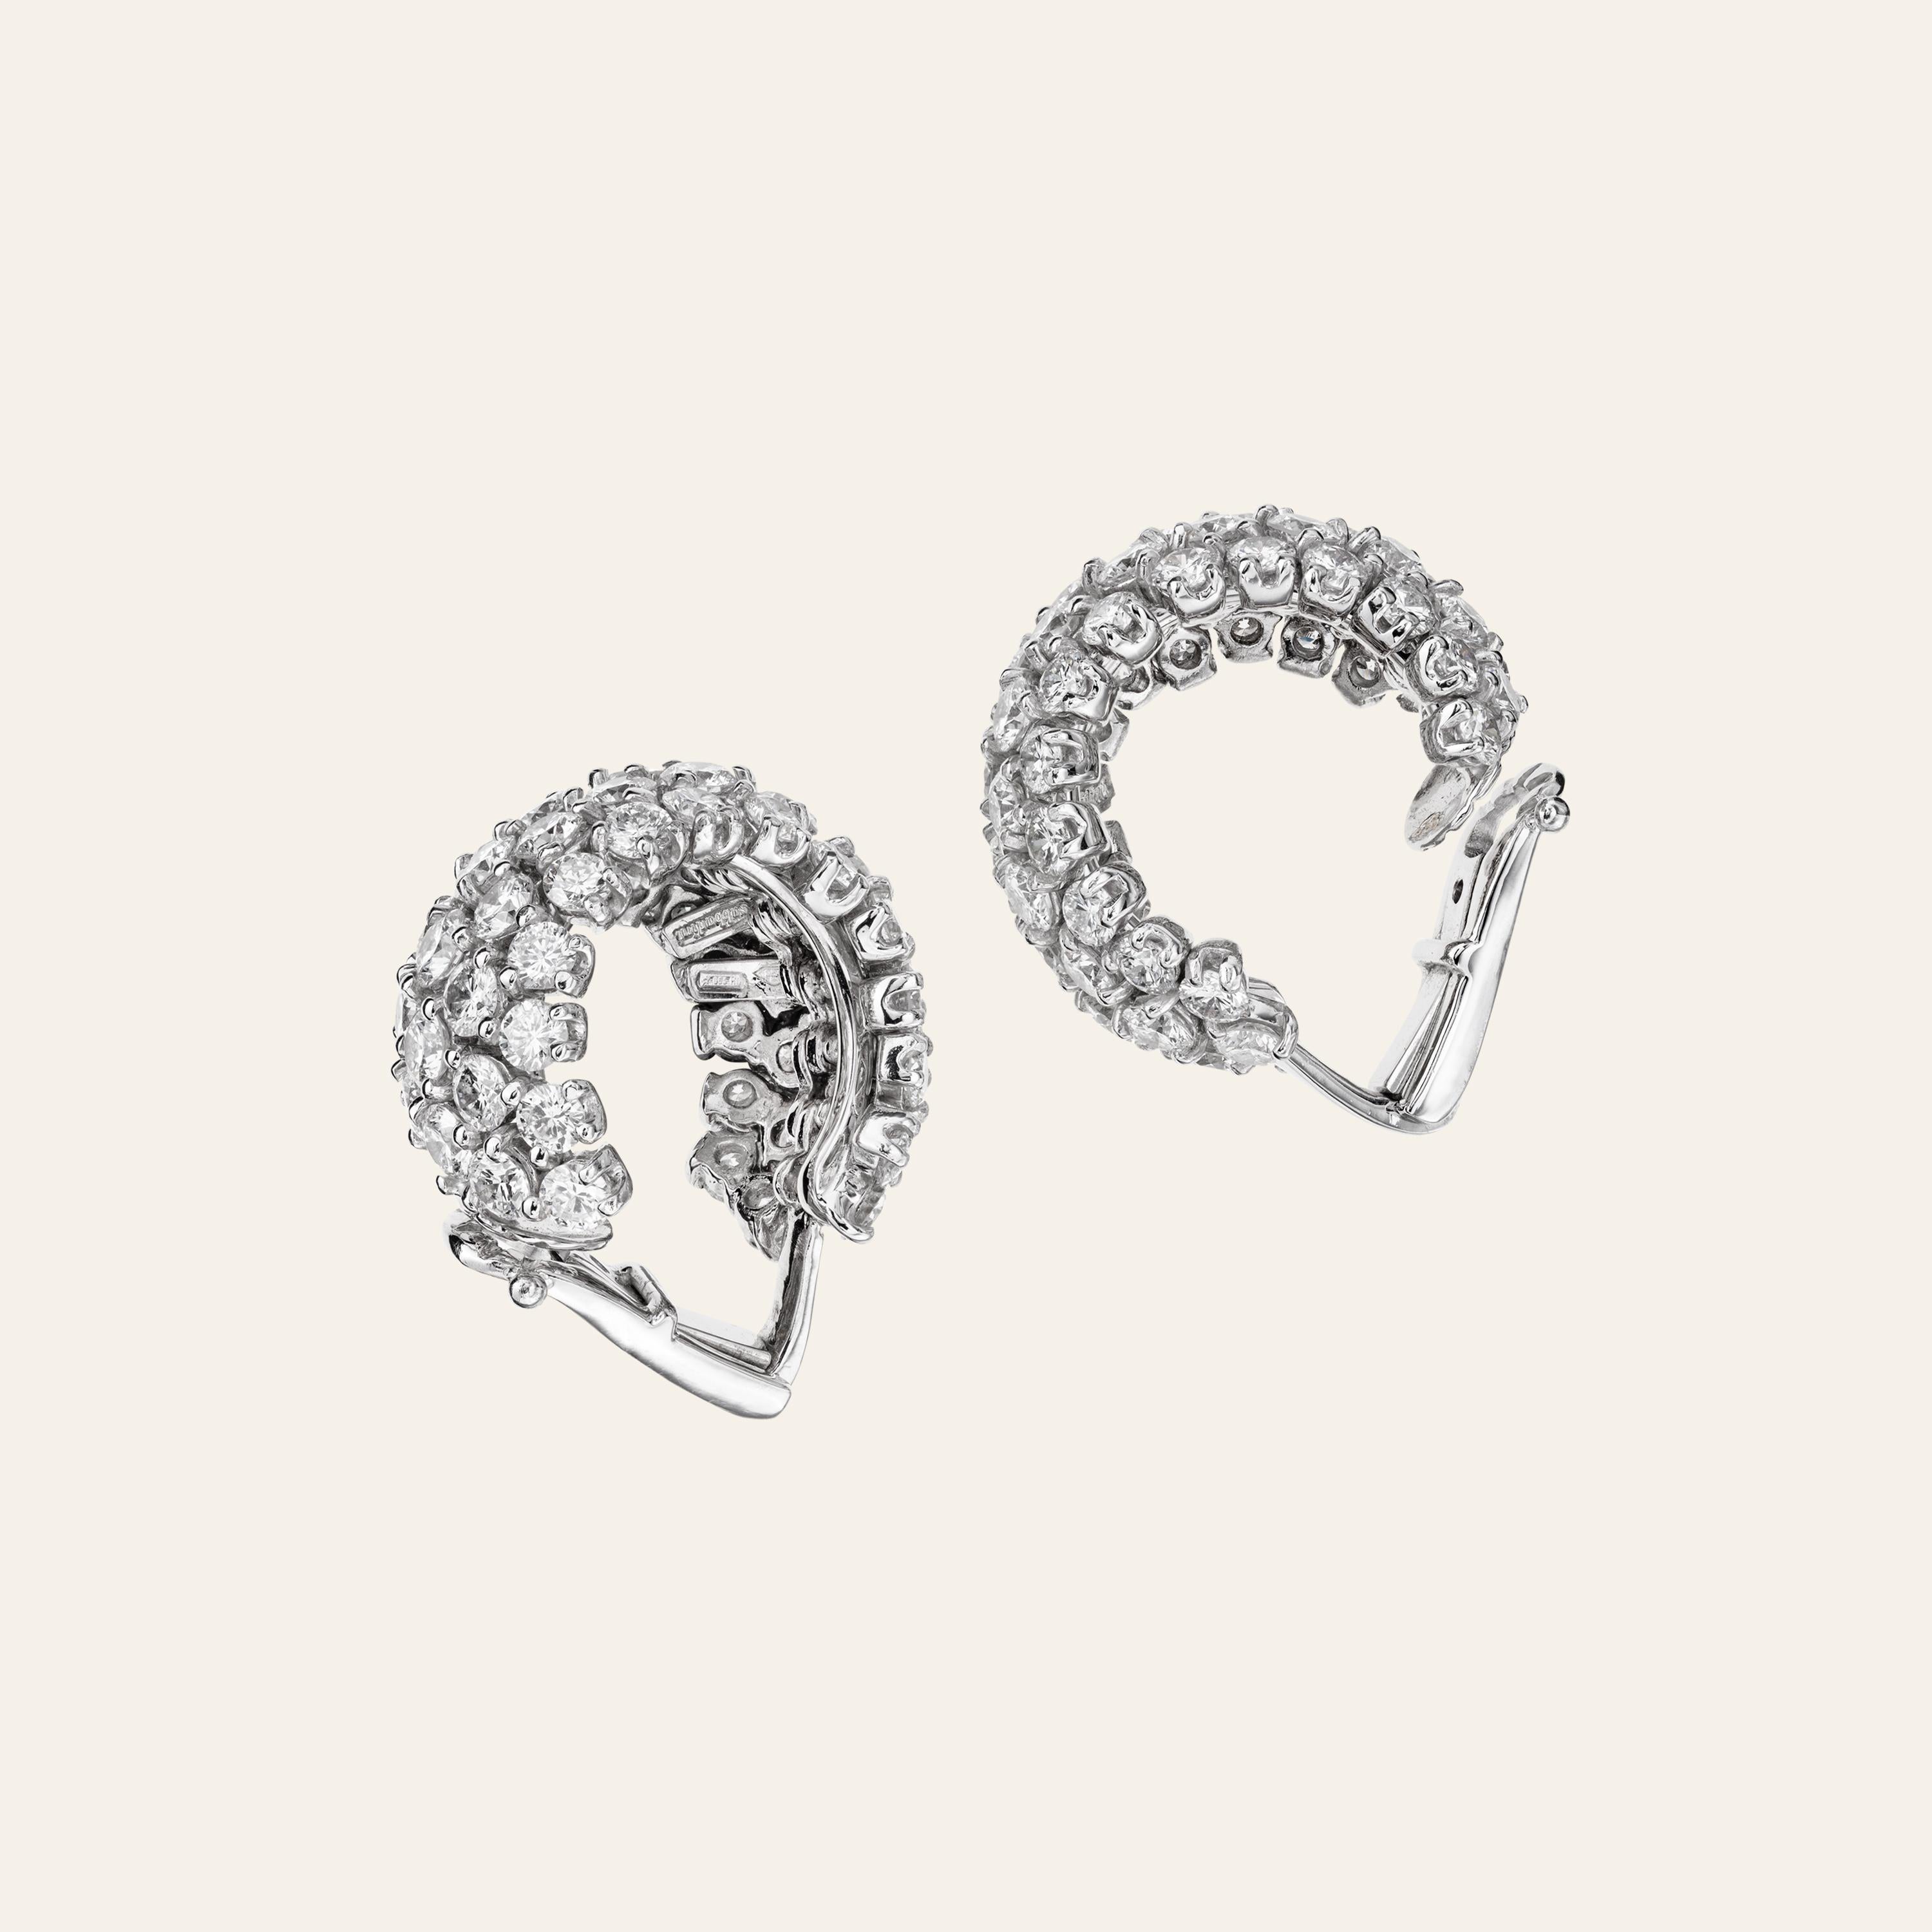 Iconic Sabbadini Style White Gold & Diamonds Earrings
Platinum and 18k white gold earrings, round cut diamonds 14,22ct. Platinum 28,30gr gold 8,30gr
Hand made jewelry & designed in Milan, in Via Montenapoleone.
This item comes directly from the